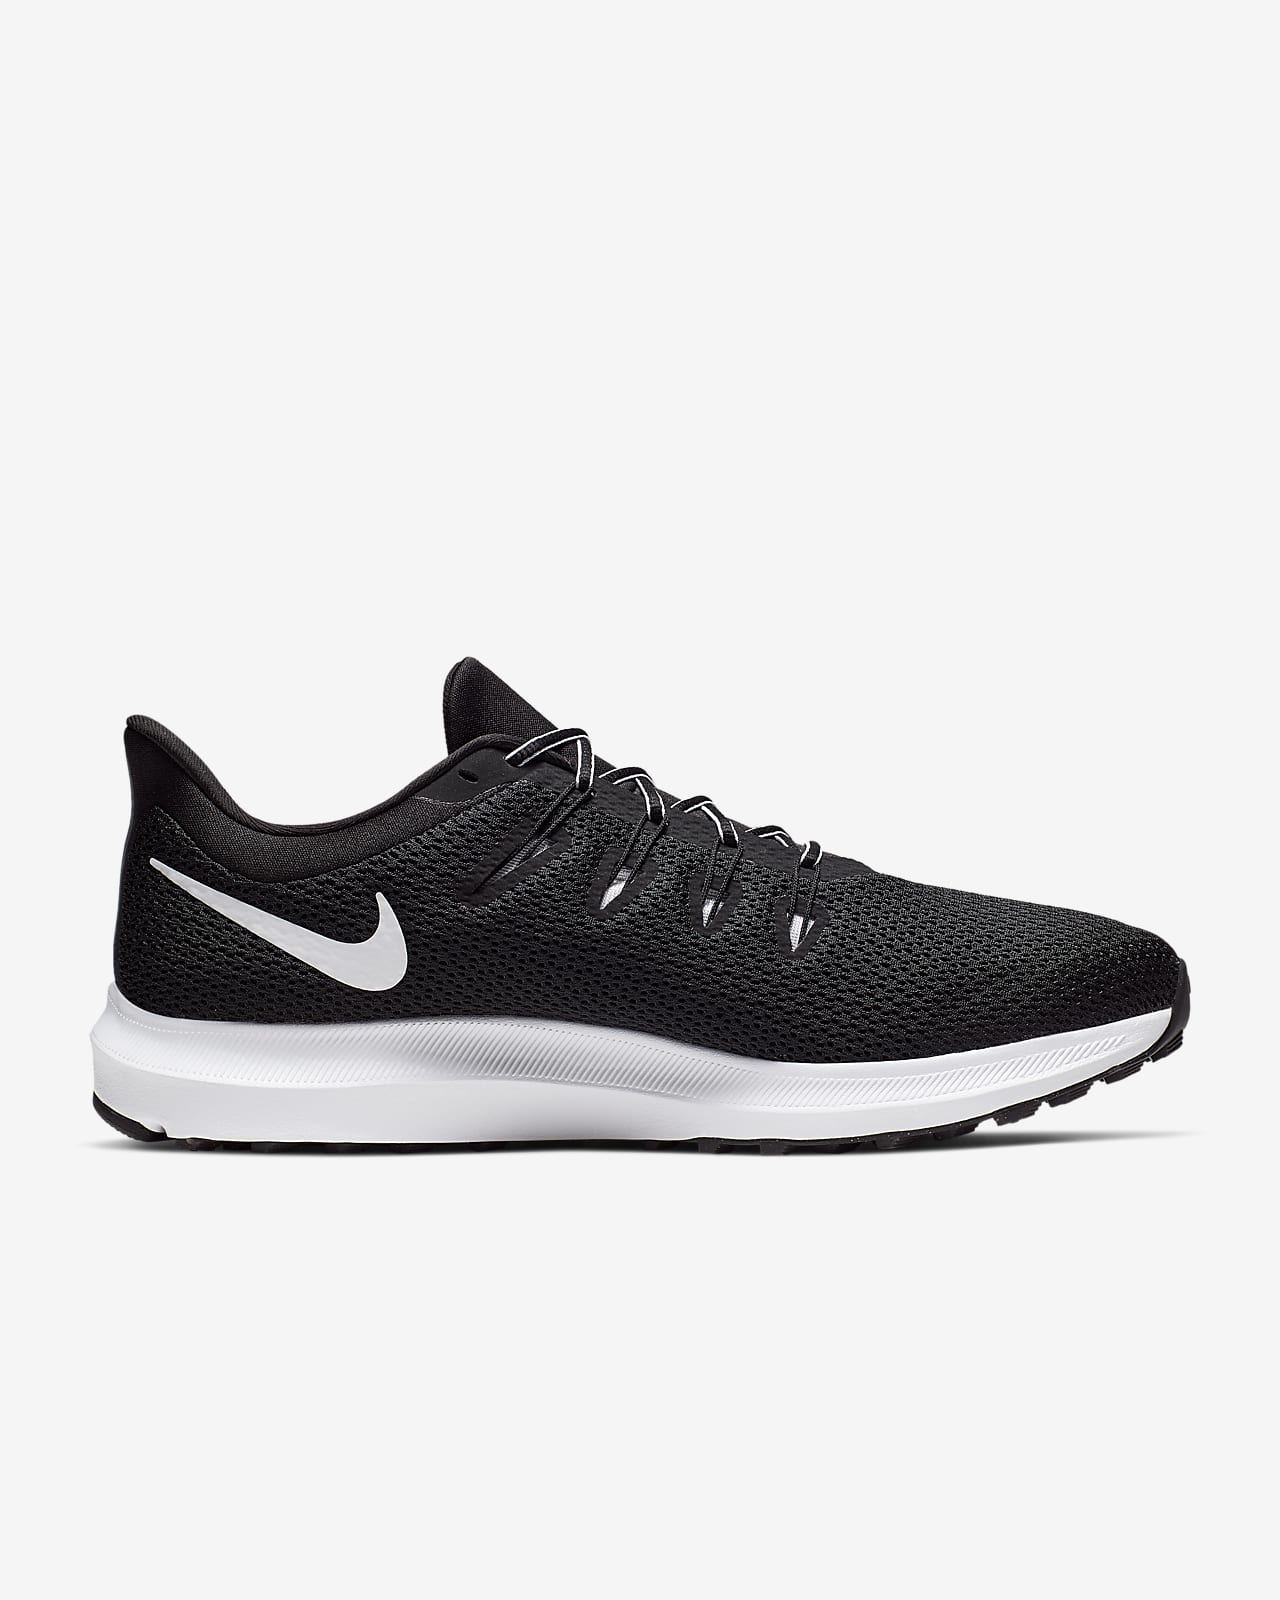 nike quest 2 men's running shoes reviews